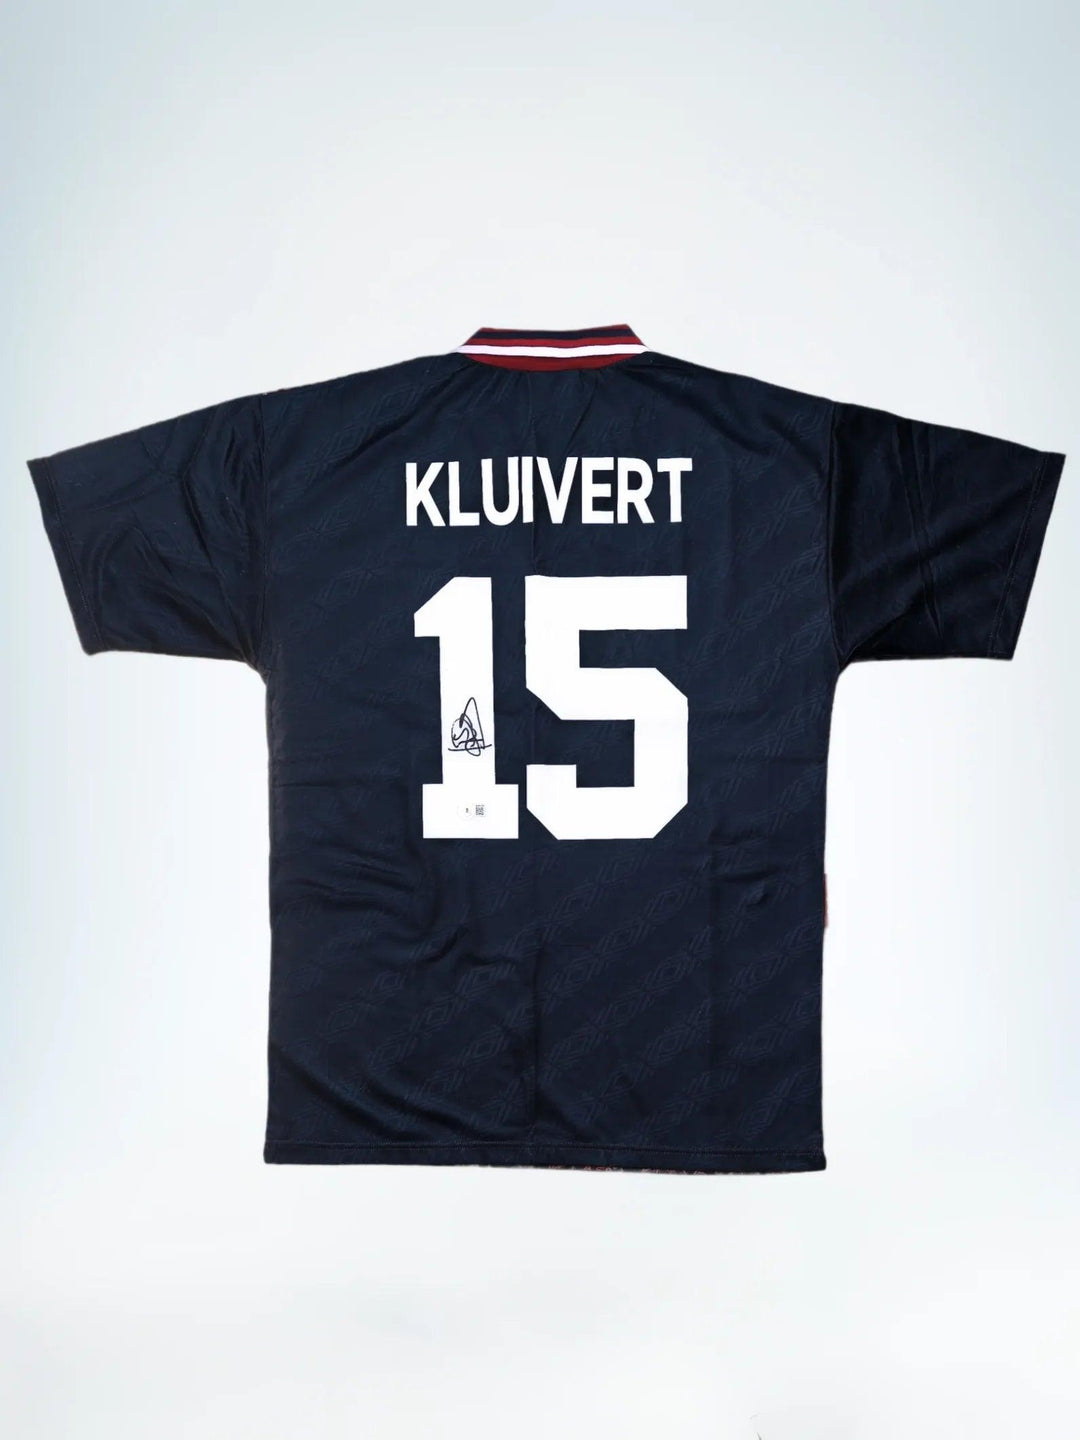 Patrick Kluivert 15 Ajax 1994-1995 Away - Signed Soccer Shirt | Undefeated Champions